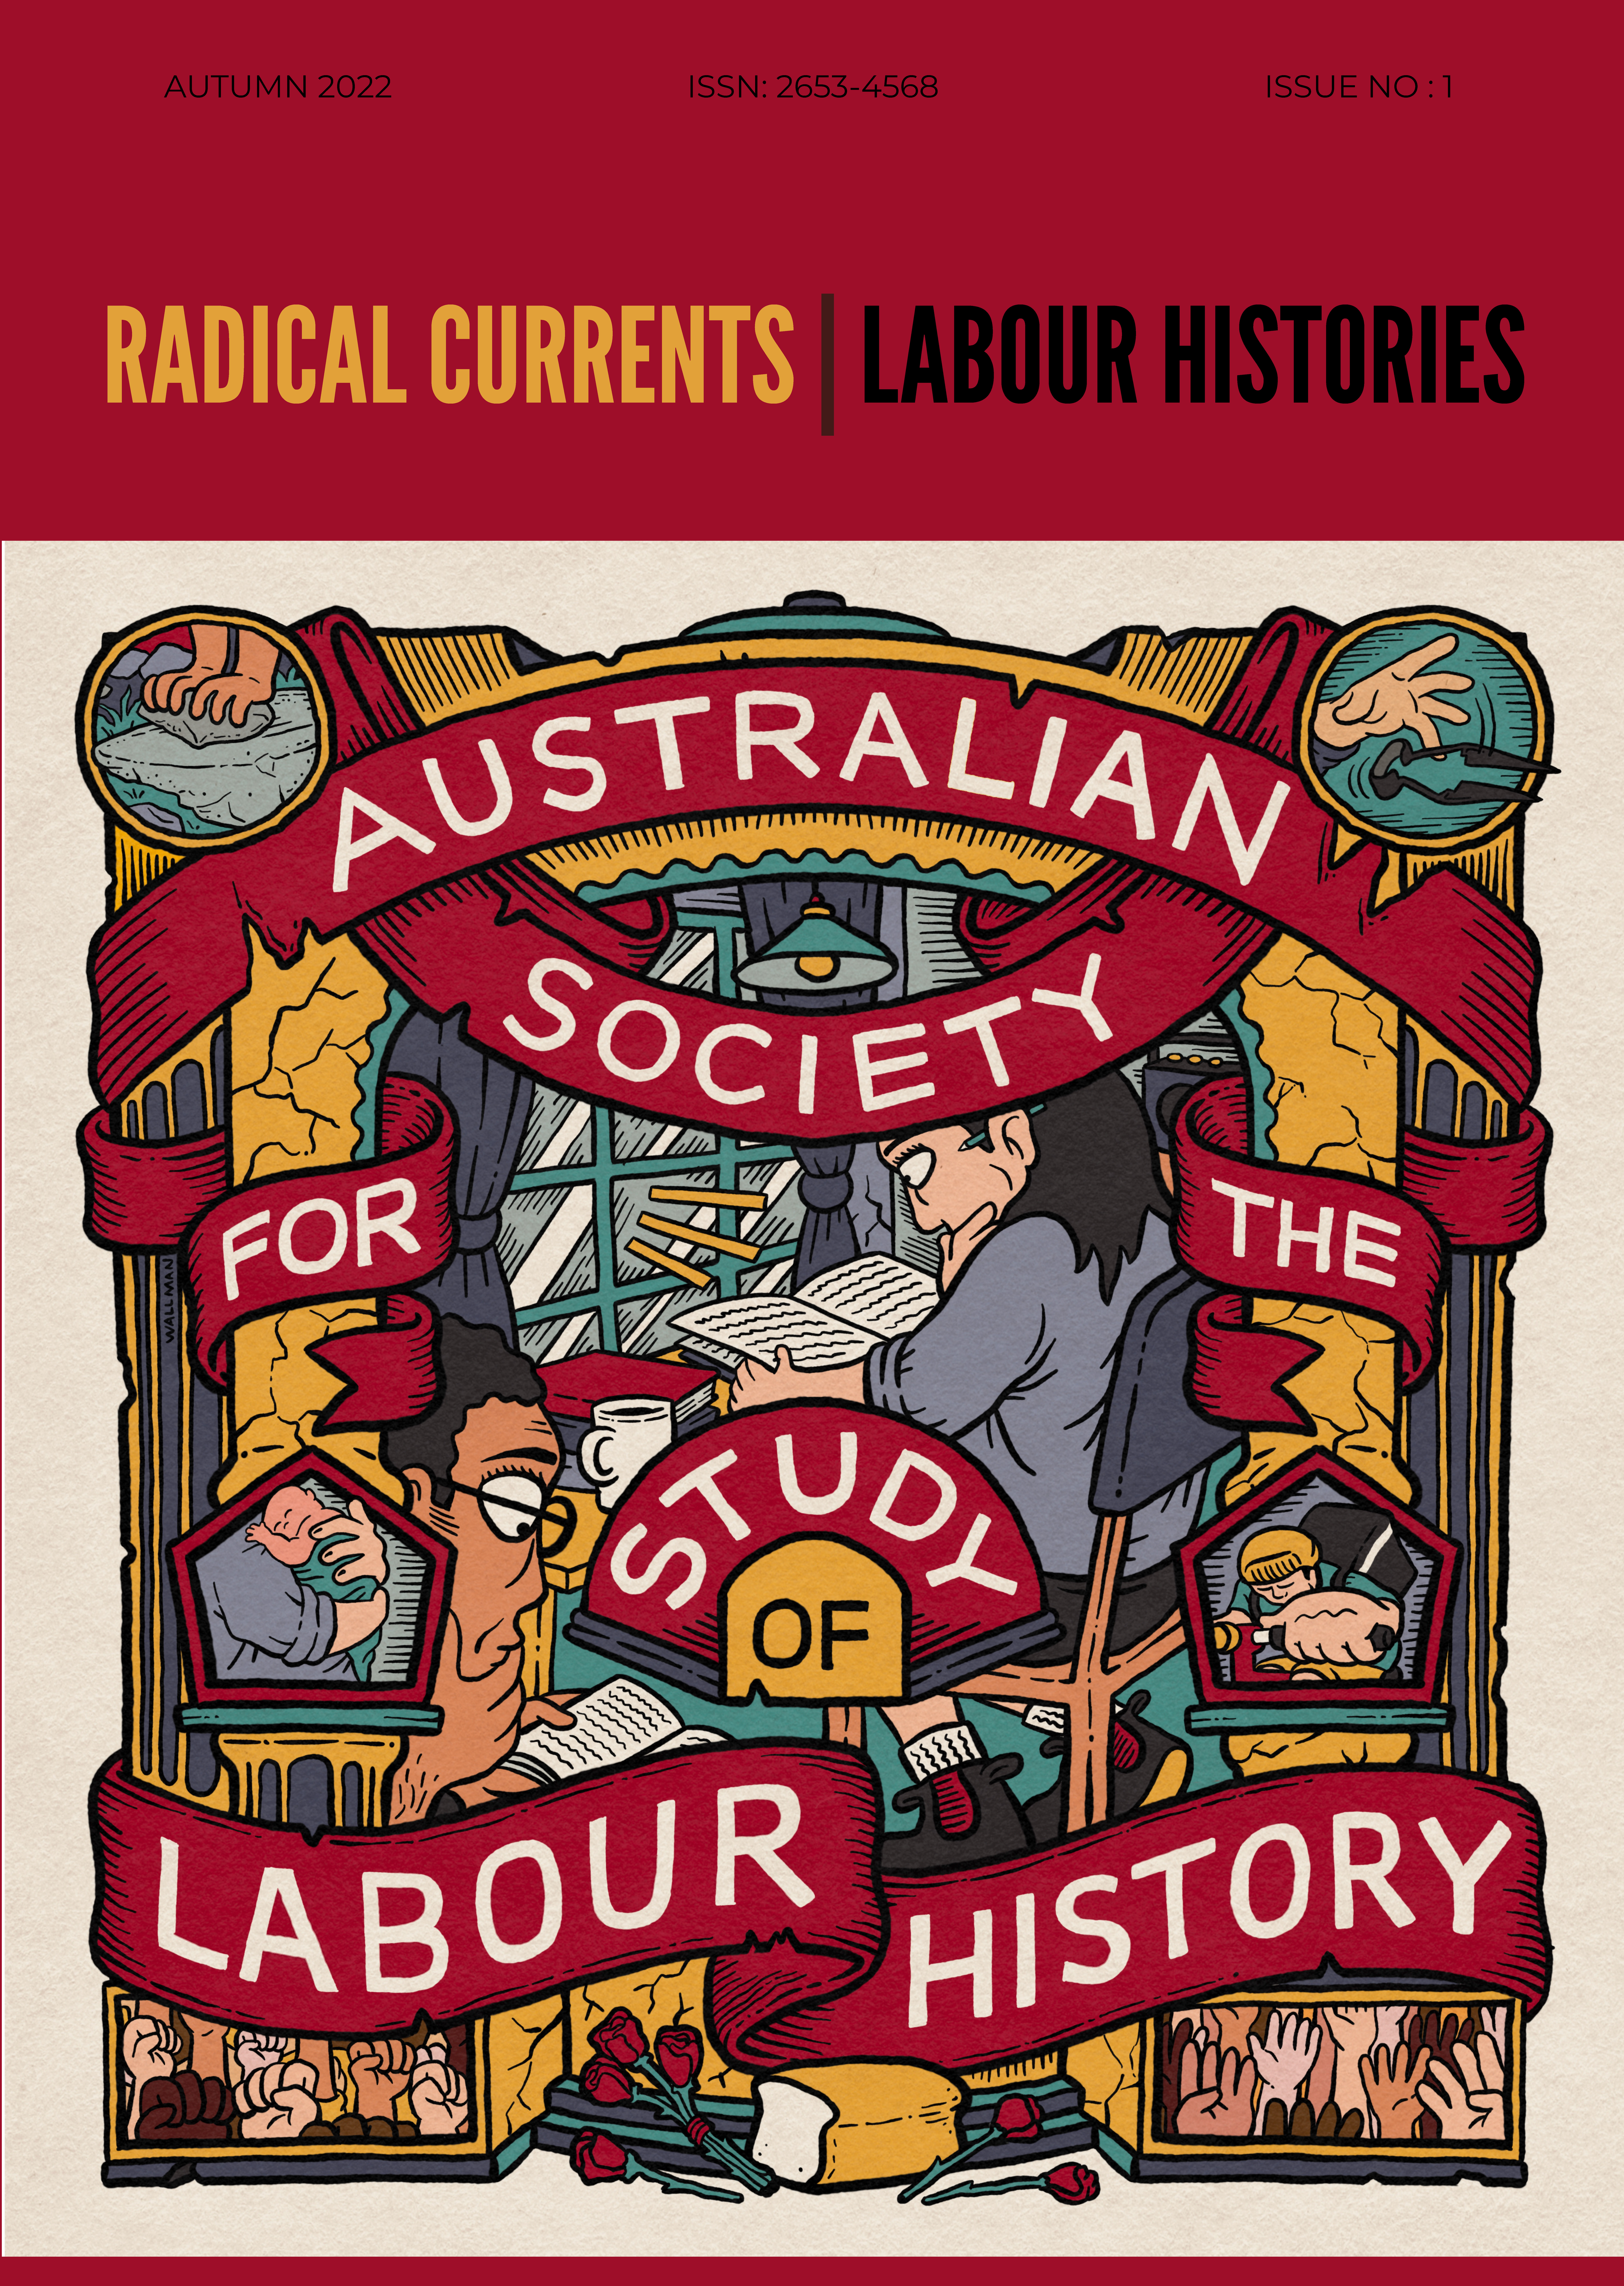 Julie Kimber and Diane Kirkby (eds), Radical Currents, Labour Histories, Issue 1, Autumn 2022, pp. 5-60.